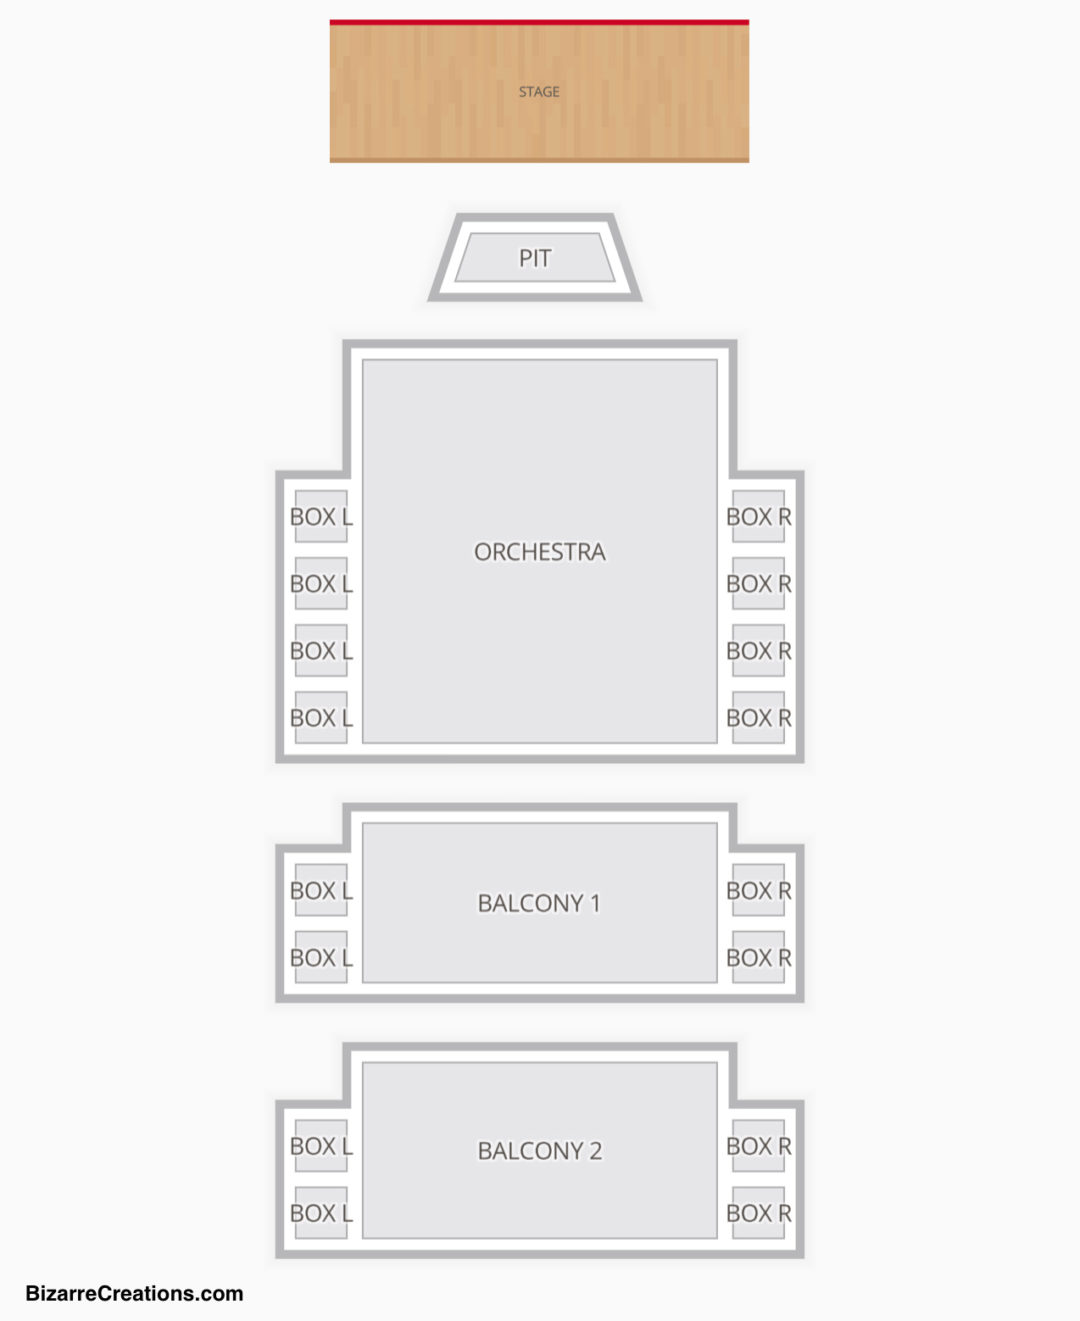 Peace Center Seating Chart